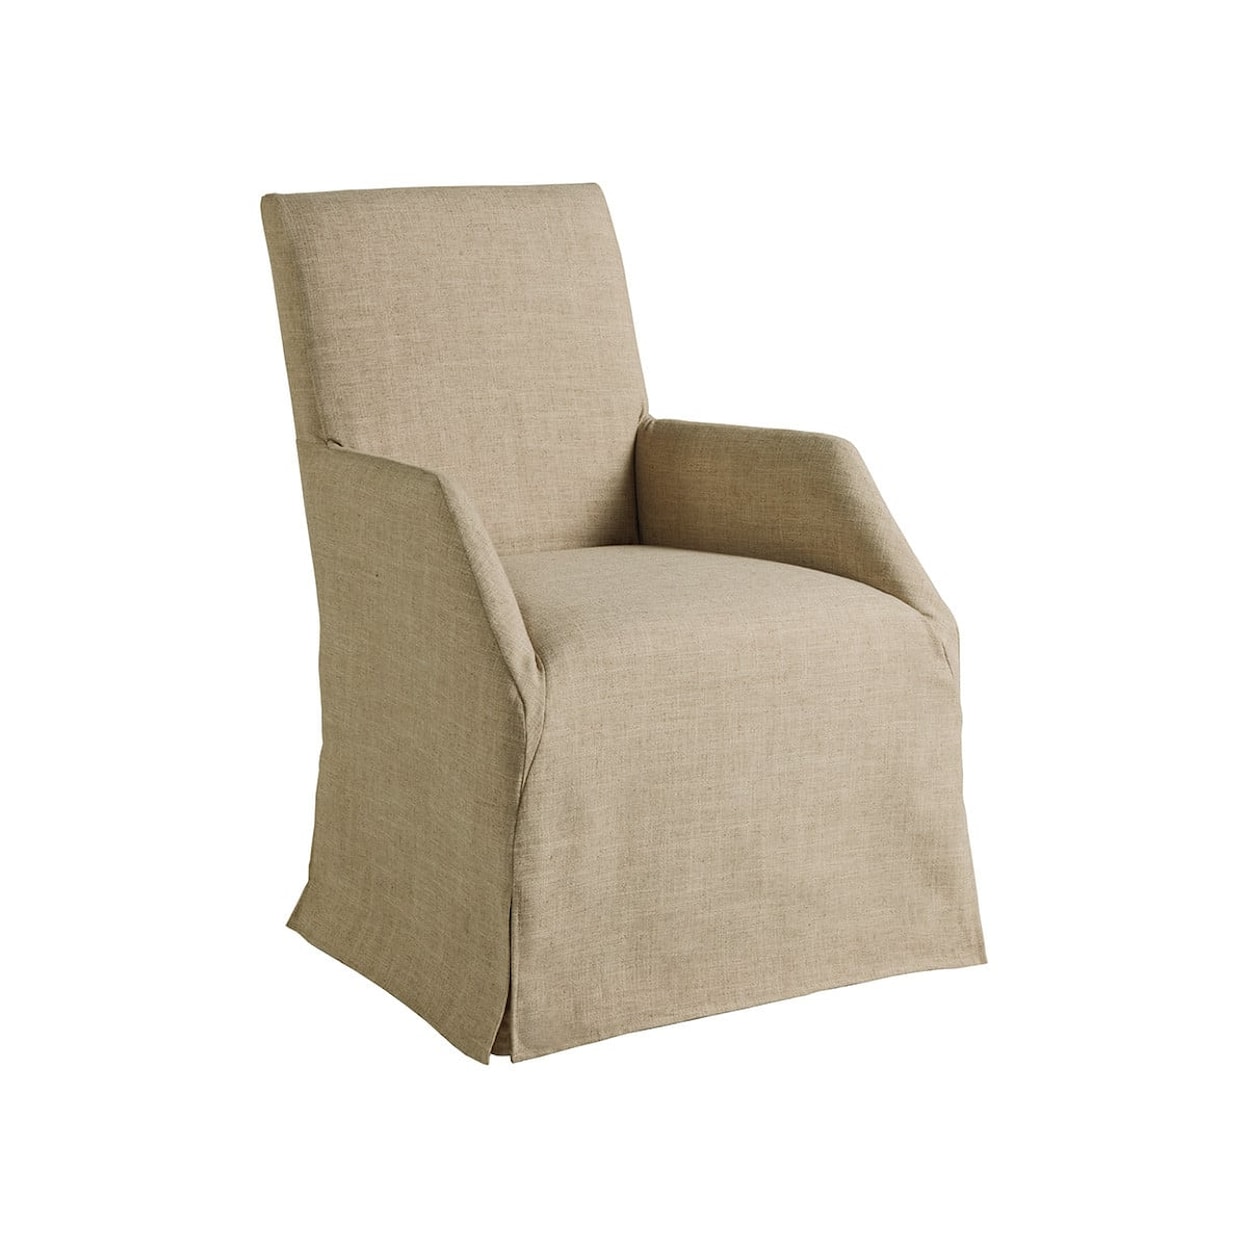 Artistica Cohesion Fiona Arm Chair With Slipcover